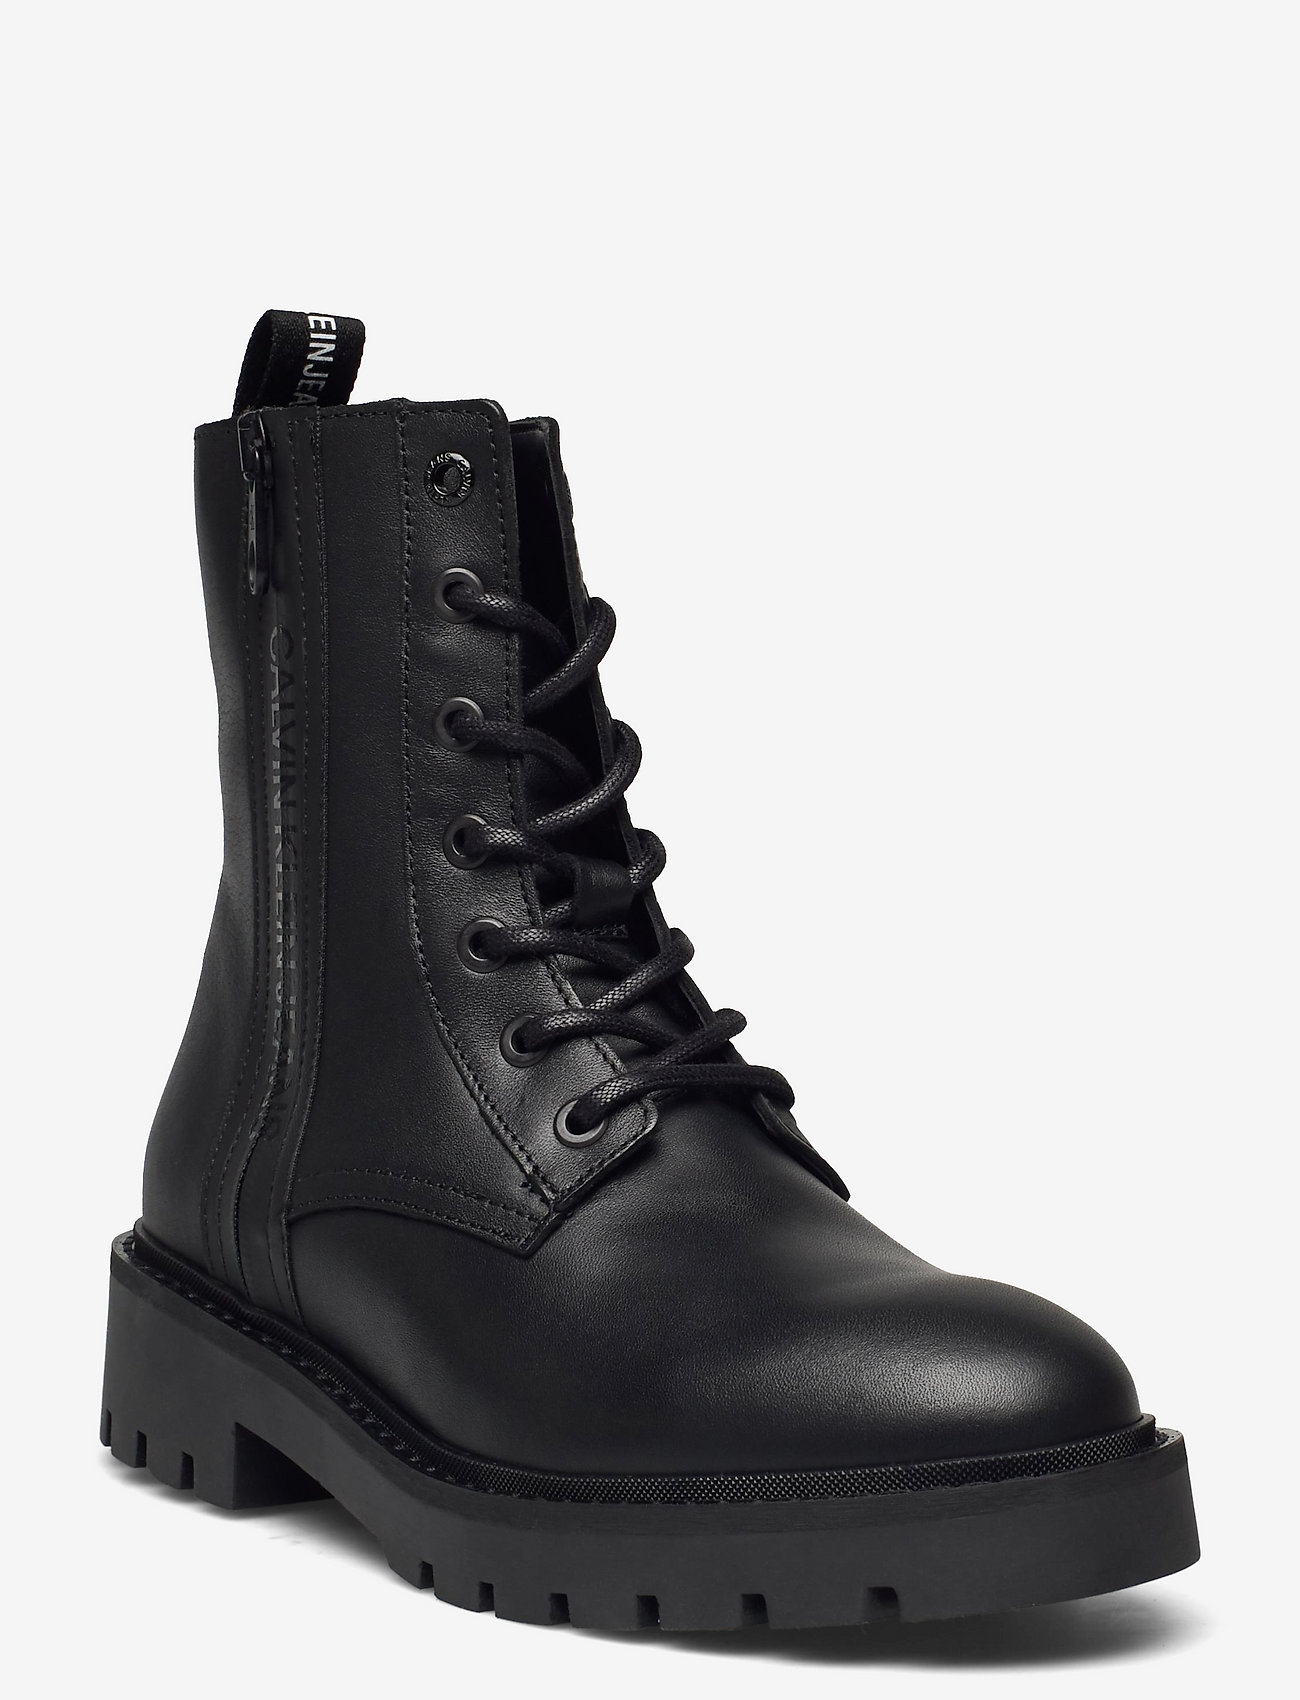 Calvin Klein Combat Mid Laceup Boot W Zip - Flat ankle boots | Boozt.com